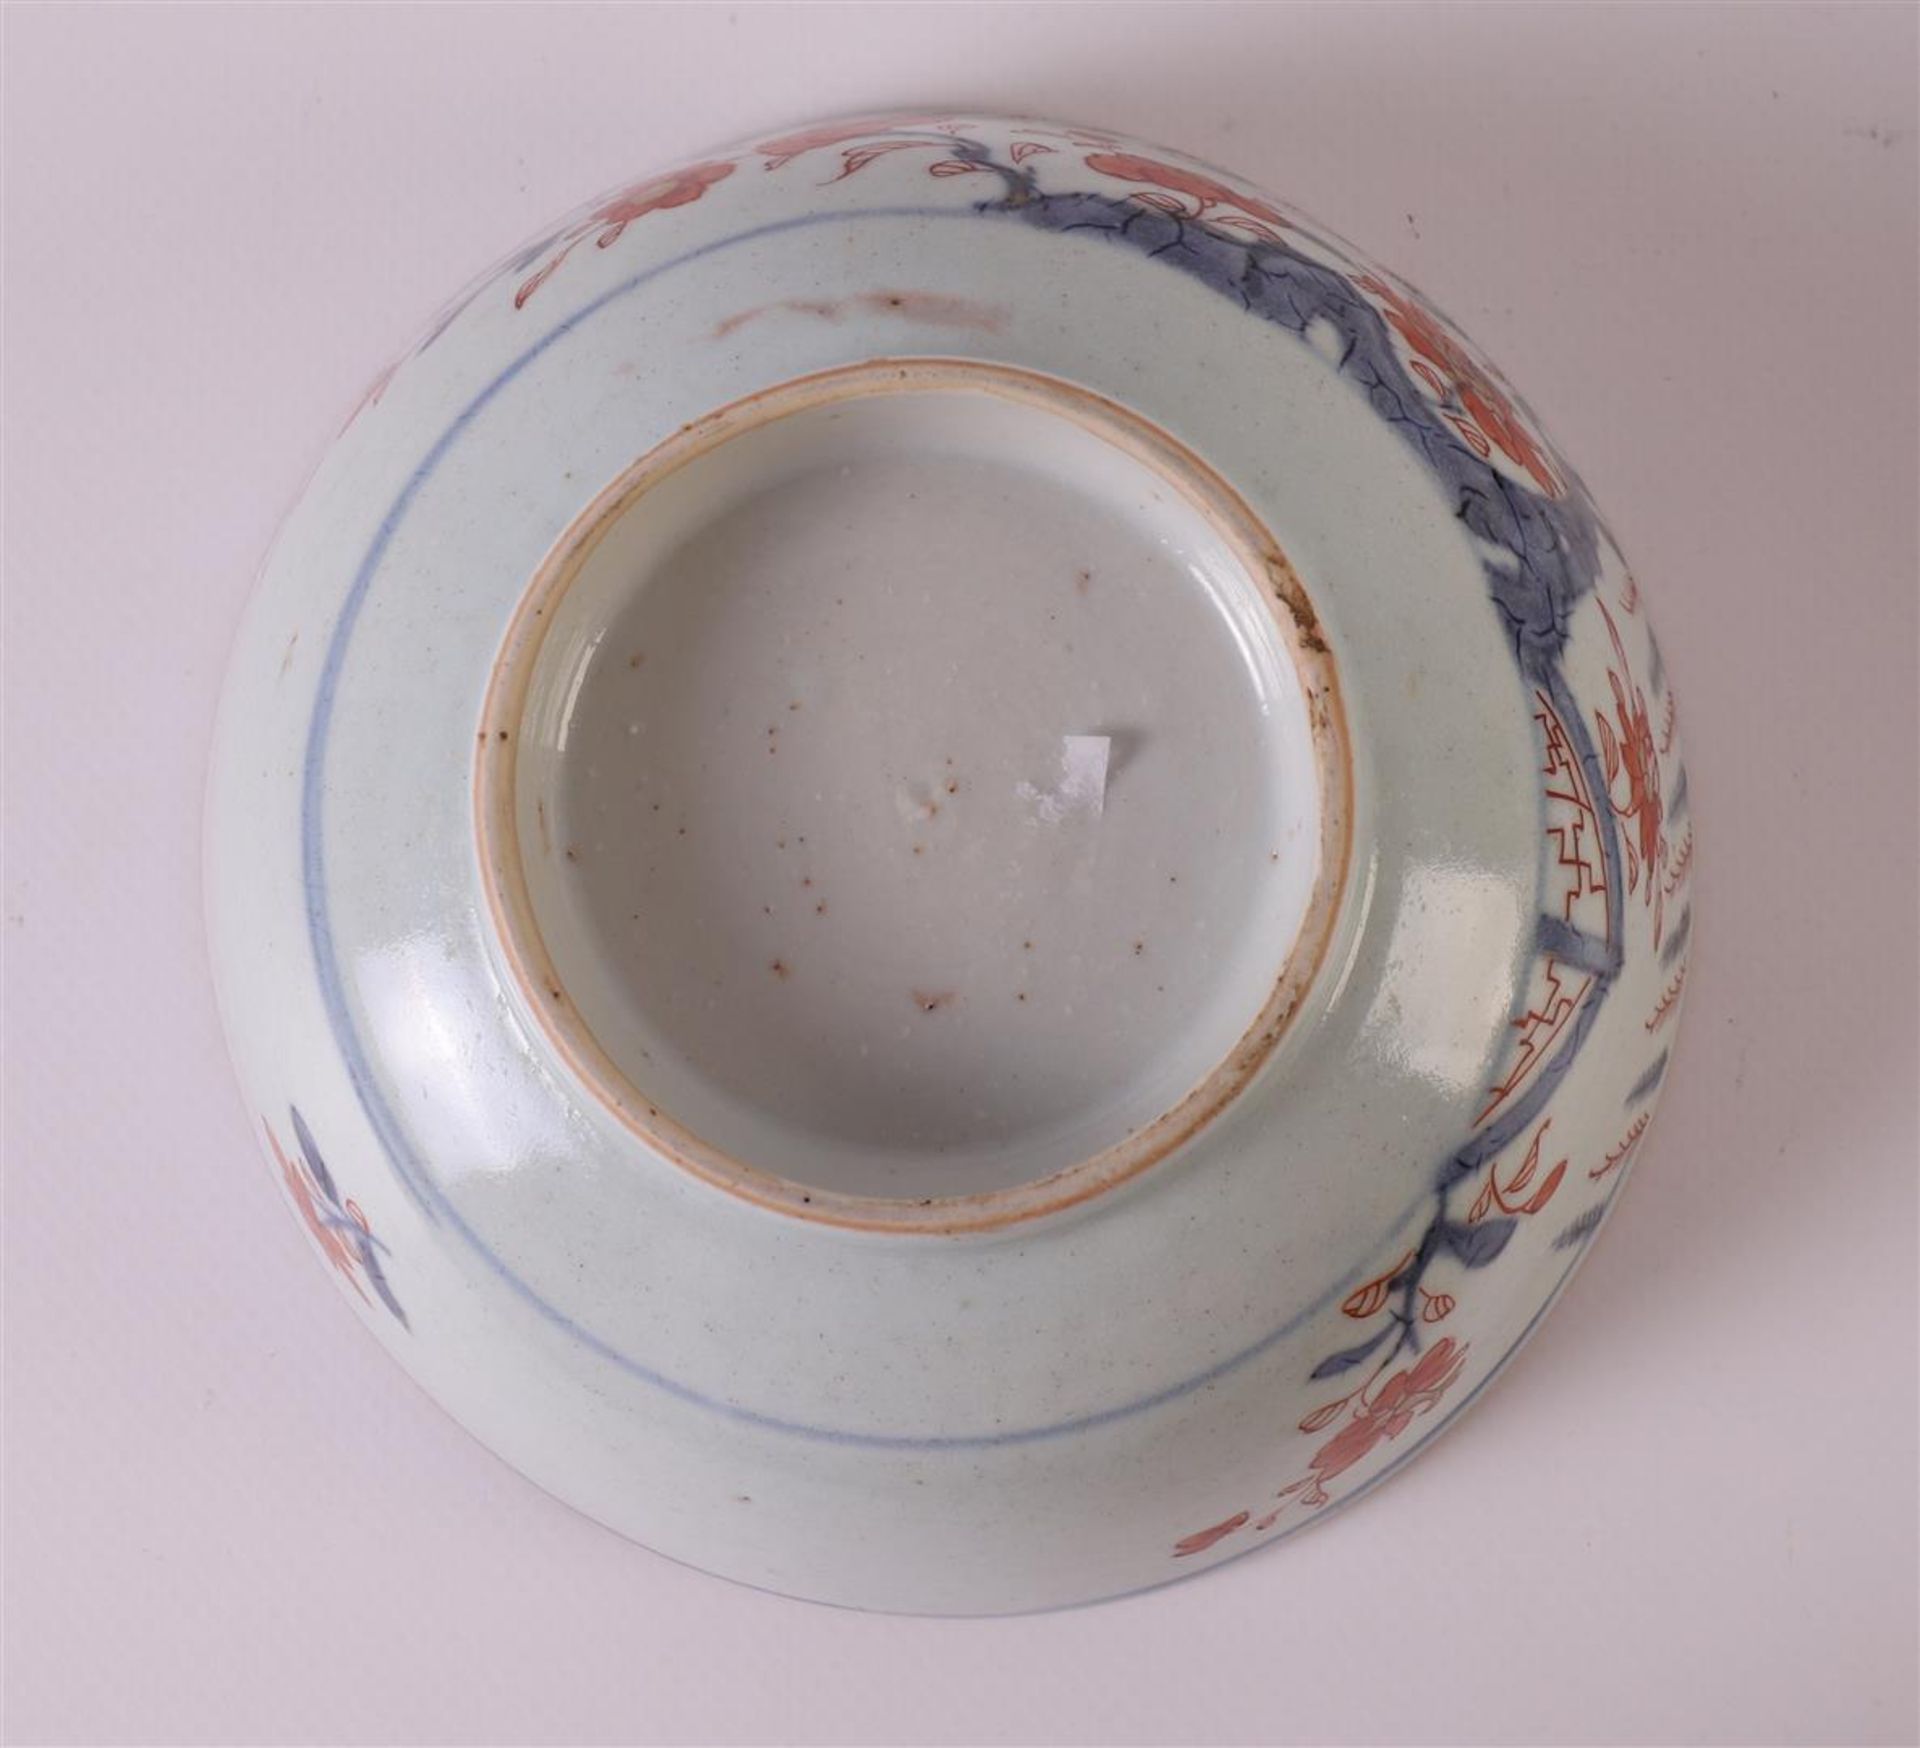 A set of porcelain Chinese Imari bowls on a stand, China, Qianlong, 18th century. Blue/red, partly - Image 10 of 10